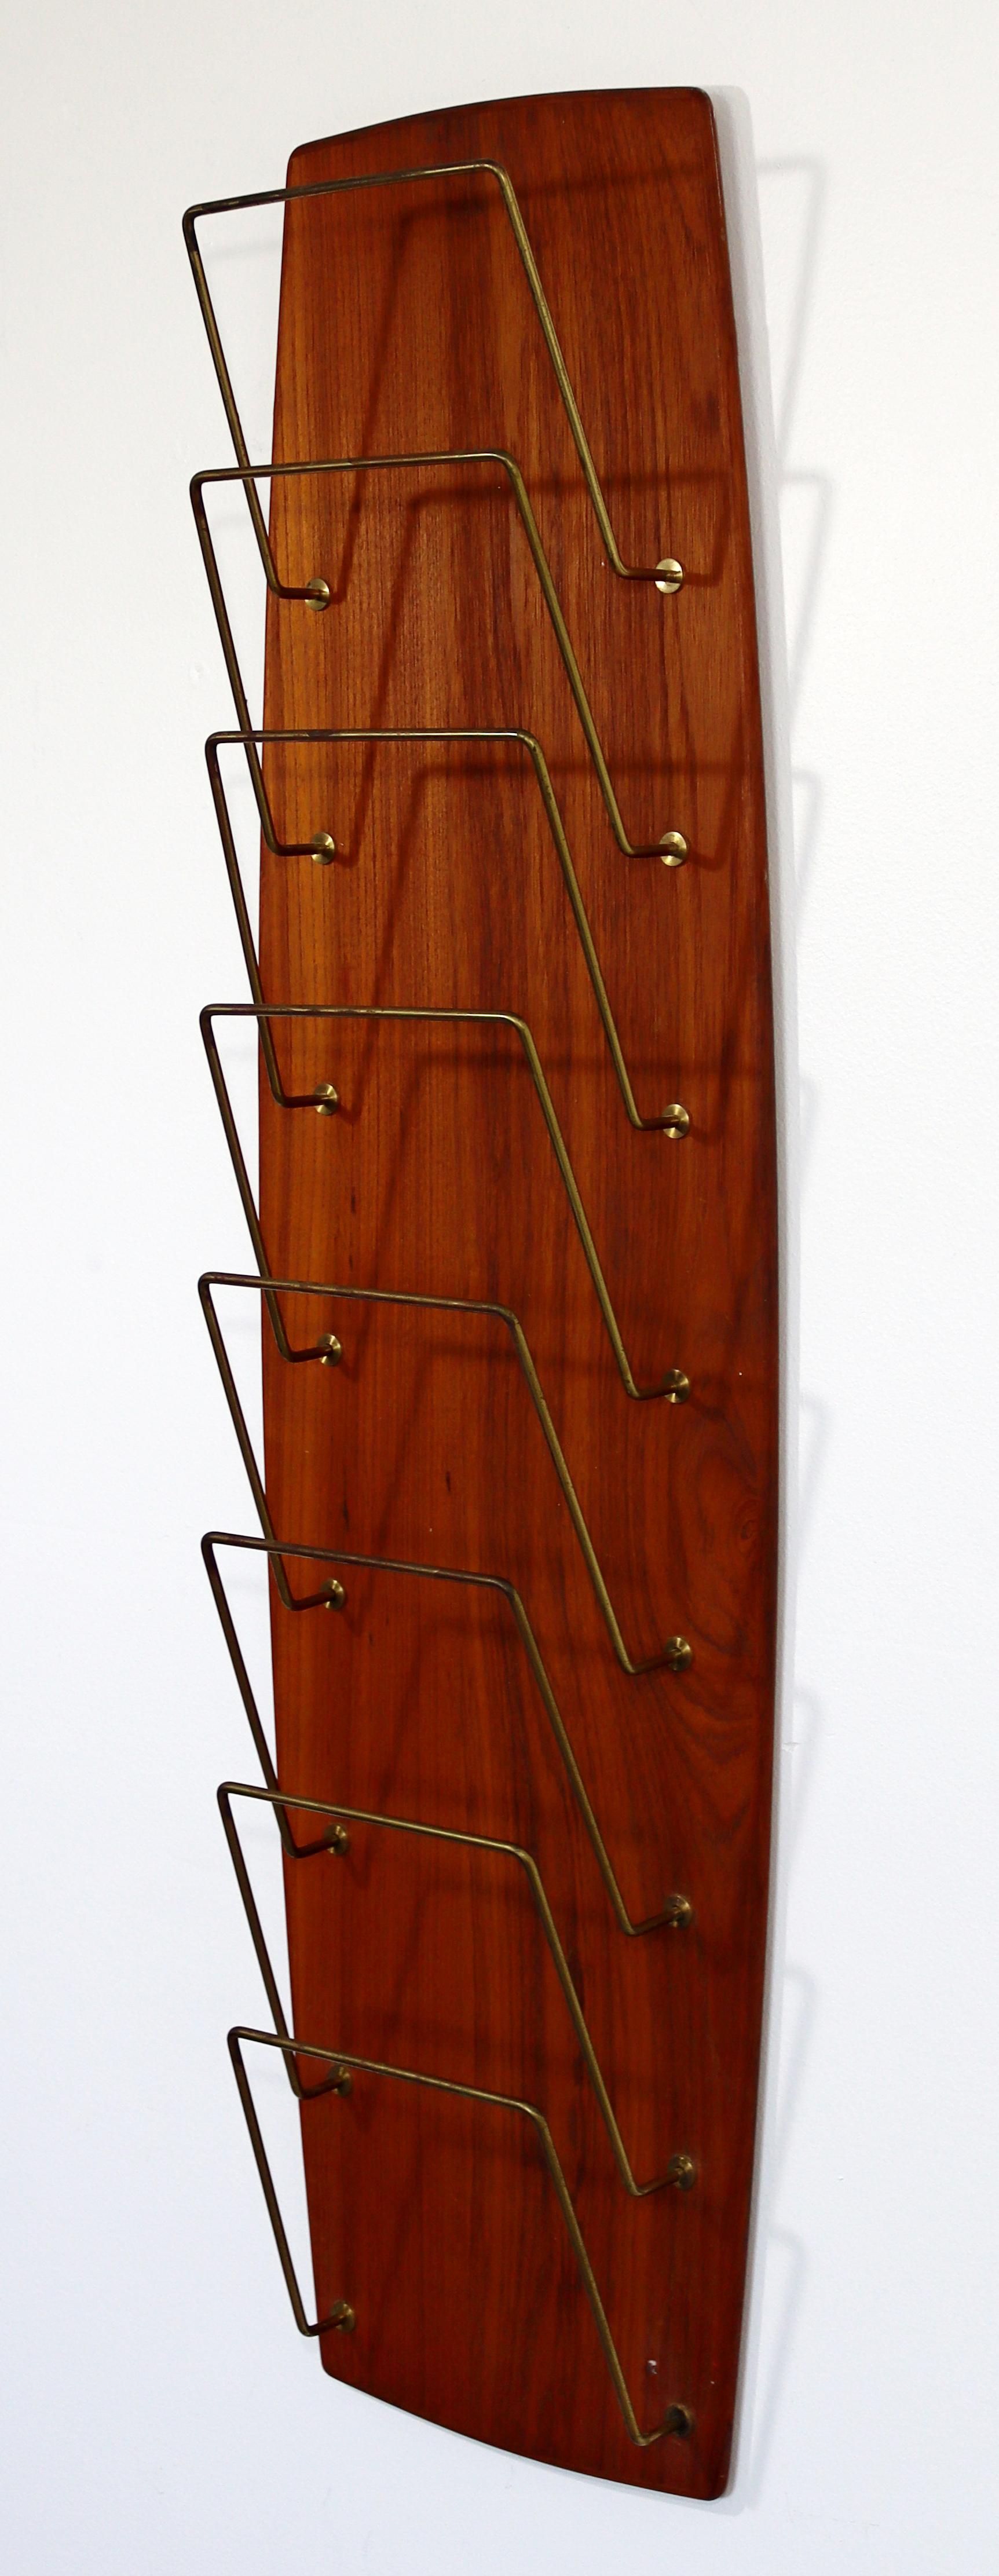 For your consideration is a delightful, Danish, wall mounted magazine rack, with brass racks, circa the 1960s. In excellent vintage condition. The dimensions are 11